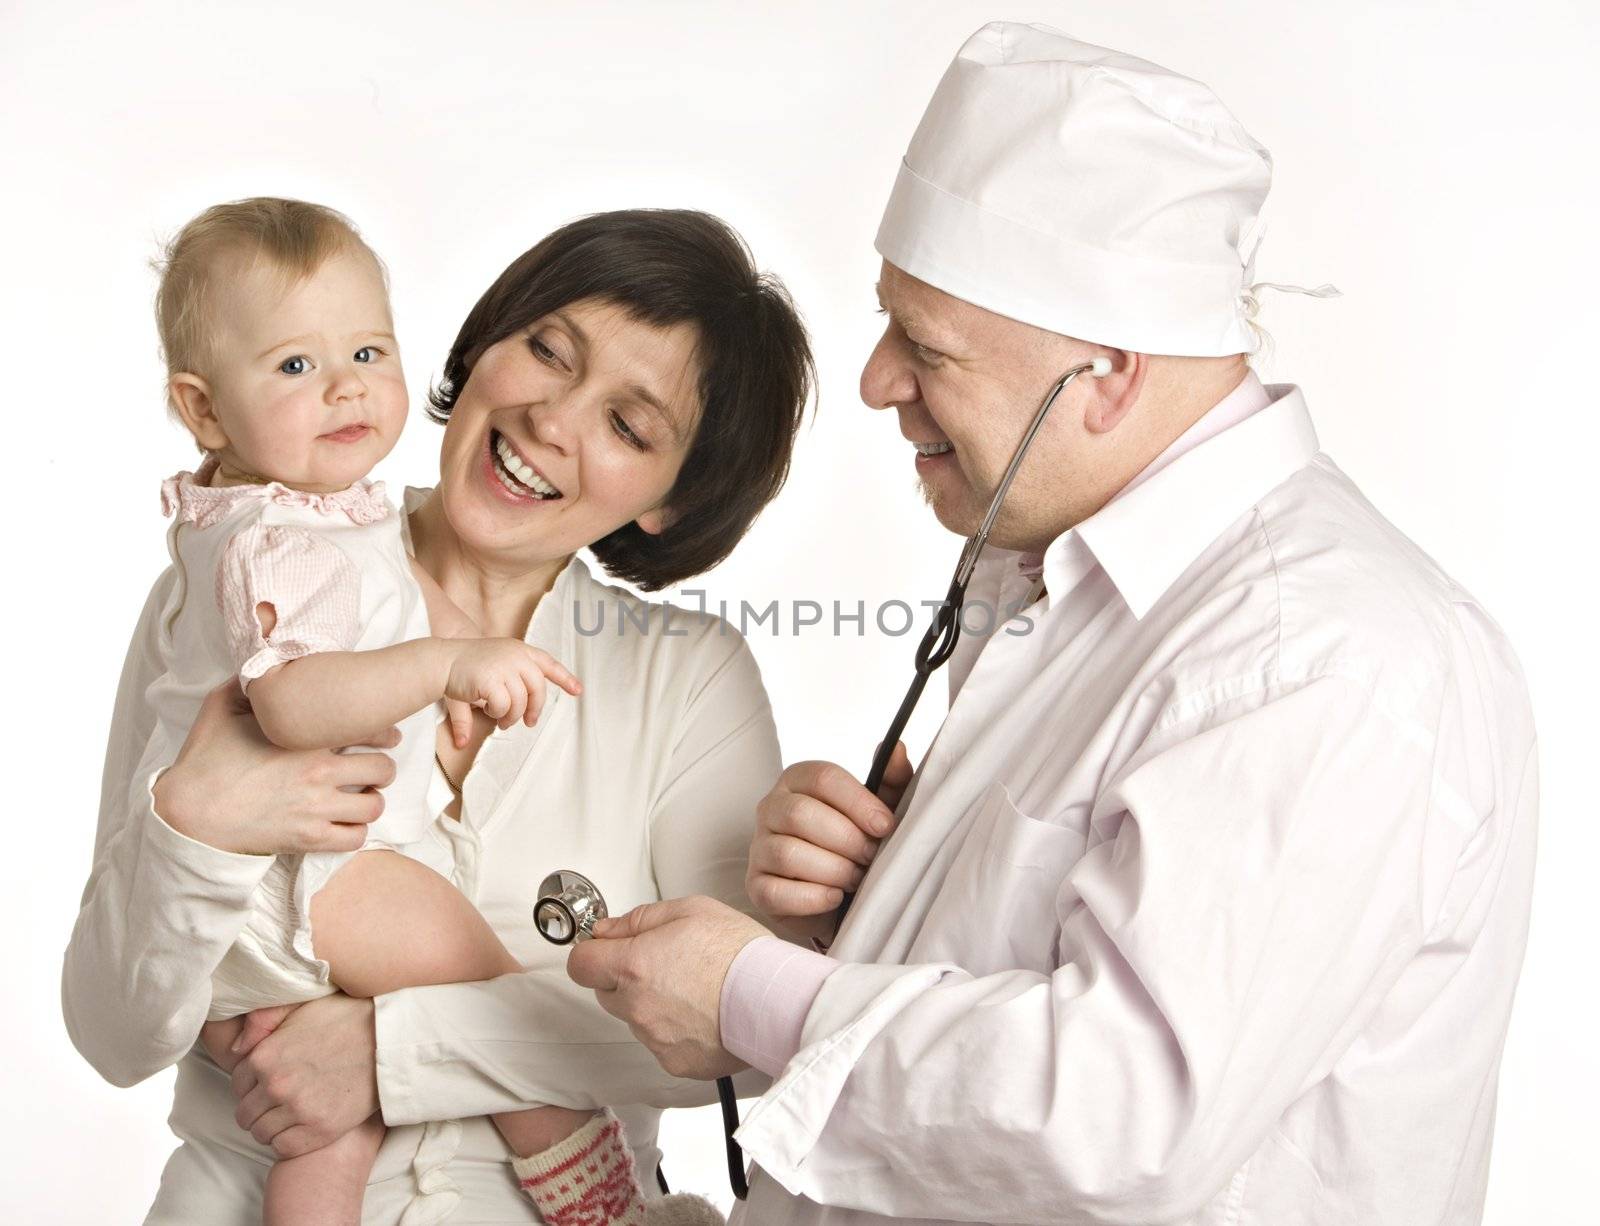 Smiling mum with the little girl on hands stands near to the doctor in white dressing gown on a white background
